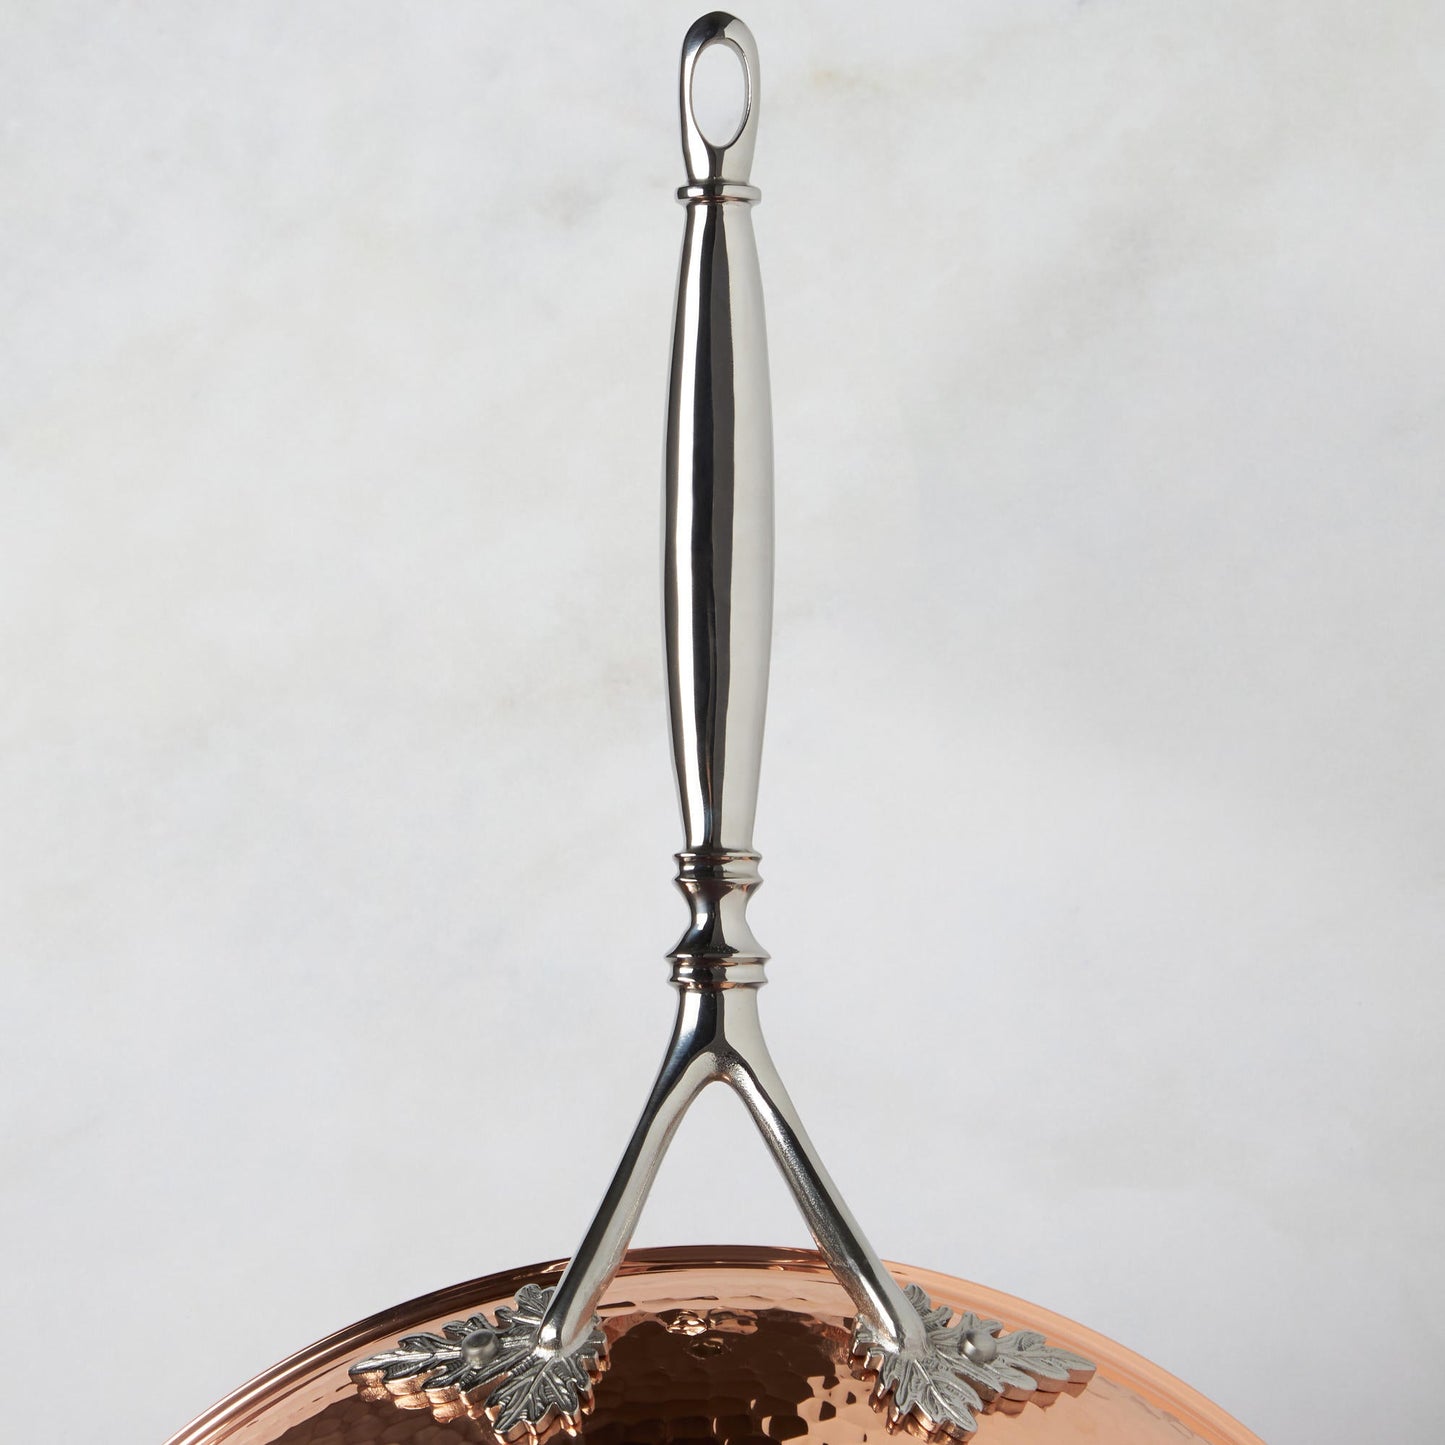 Beautiful Opus Cupra stainless steel long stick handle decorated with delicate leaves on Opus Cupra cookware by Ruffoni